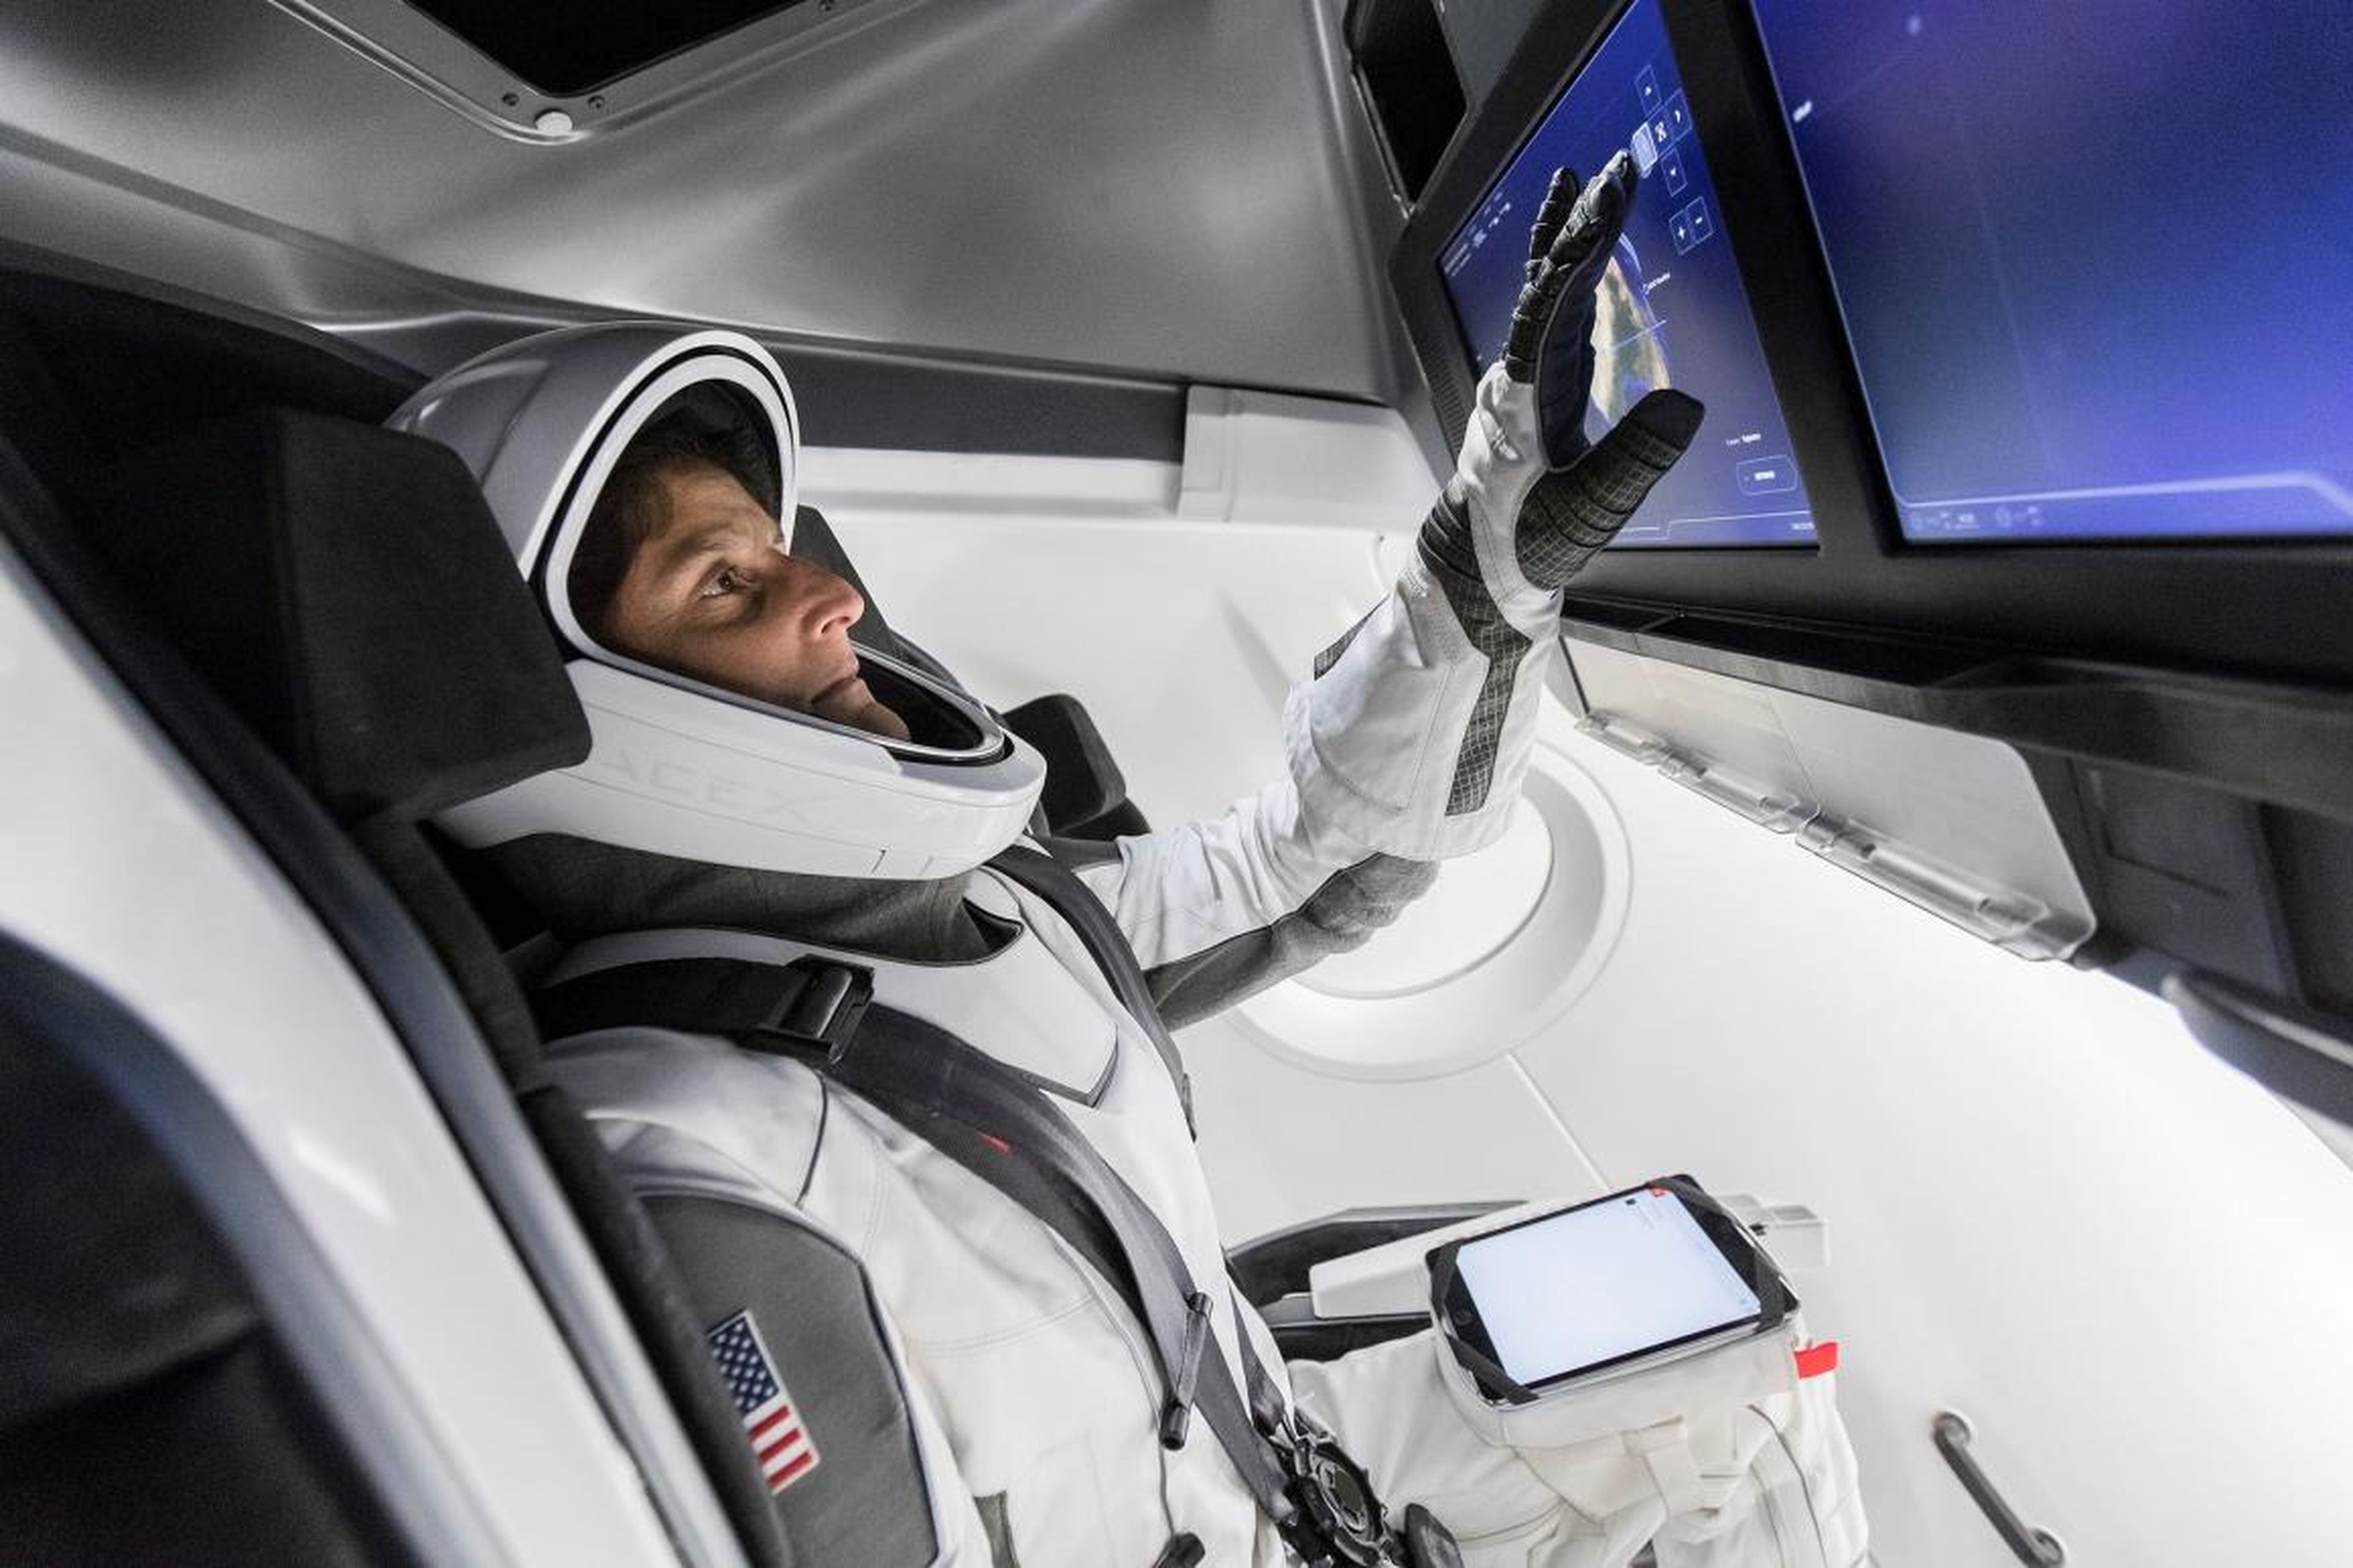 NASA astronaut and Commercial Crew member Sunita Williams tests mock-ups of SpaceX's Crew Dragon spaceship and spacesuit in April 2018.